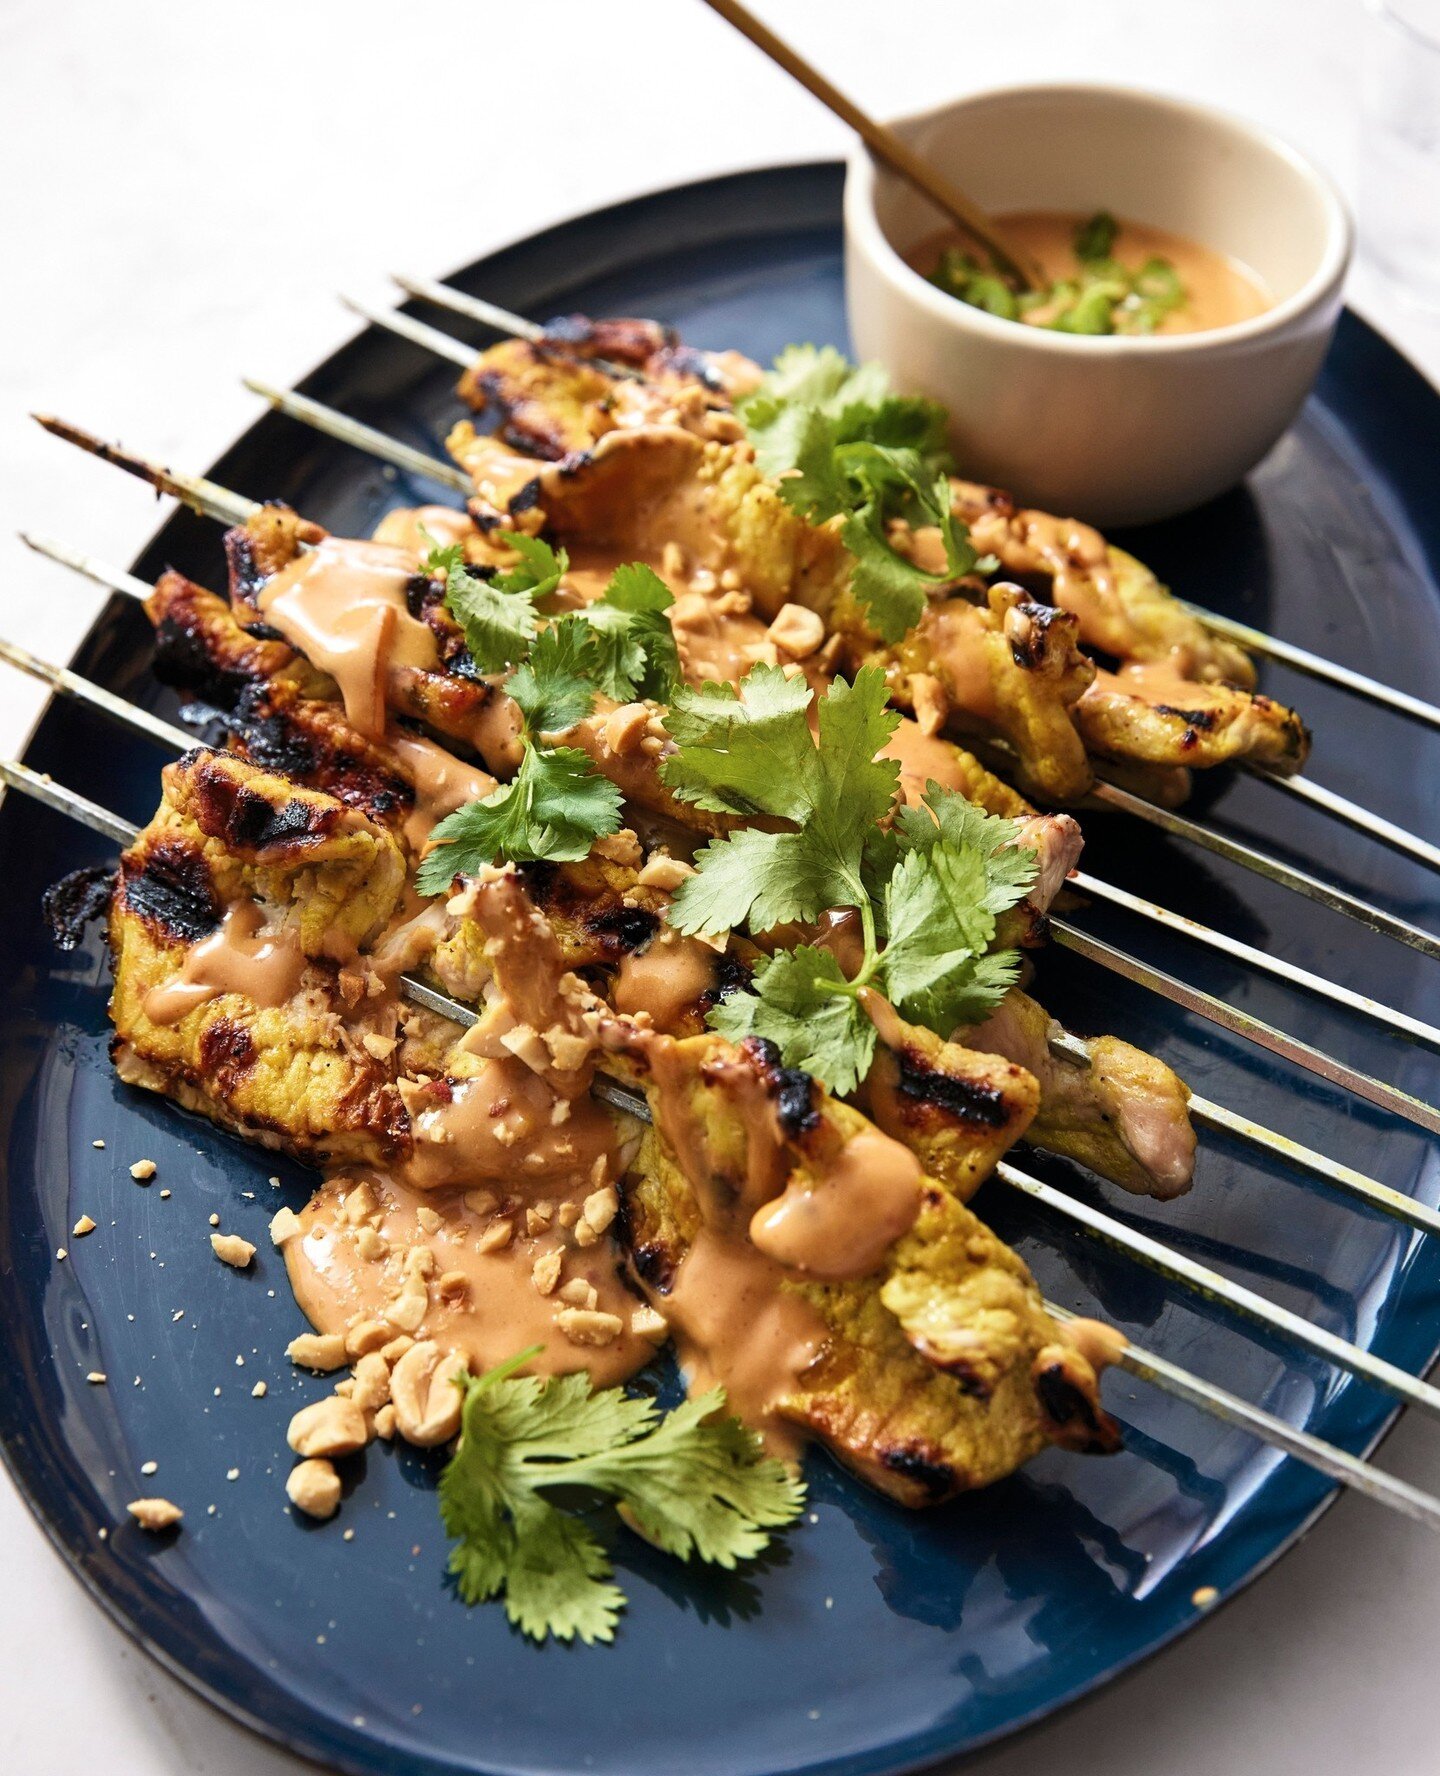 Everyday Delicious contains some of my favorite recipes, developed as an expression of my love for feeding friends and family. I'm excited to share one of these recipes with you today: Better Than Mr Chow's Satay. ⁠
⁠
Here is the recipe in full, a sn